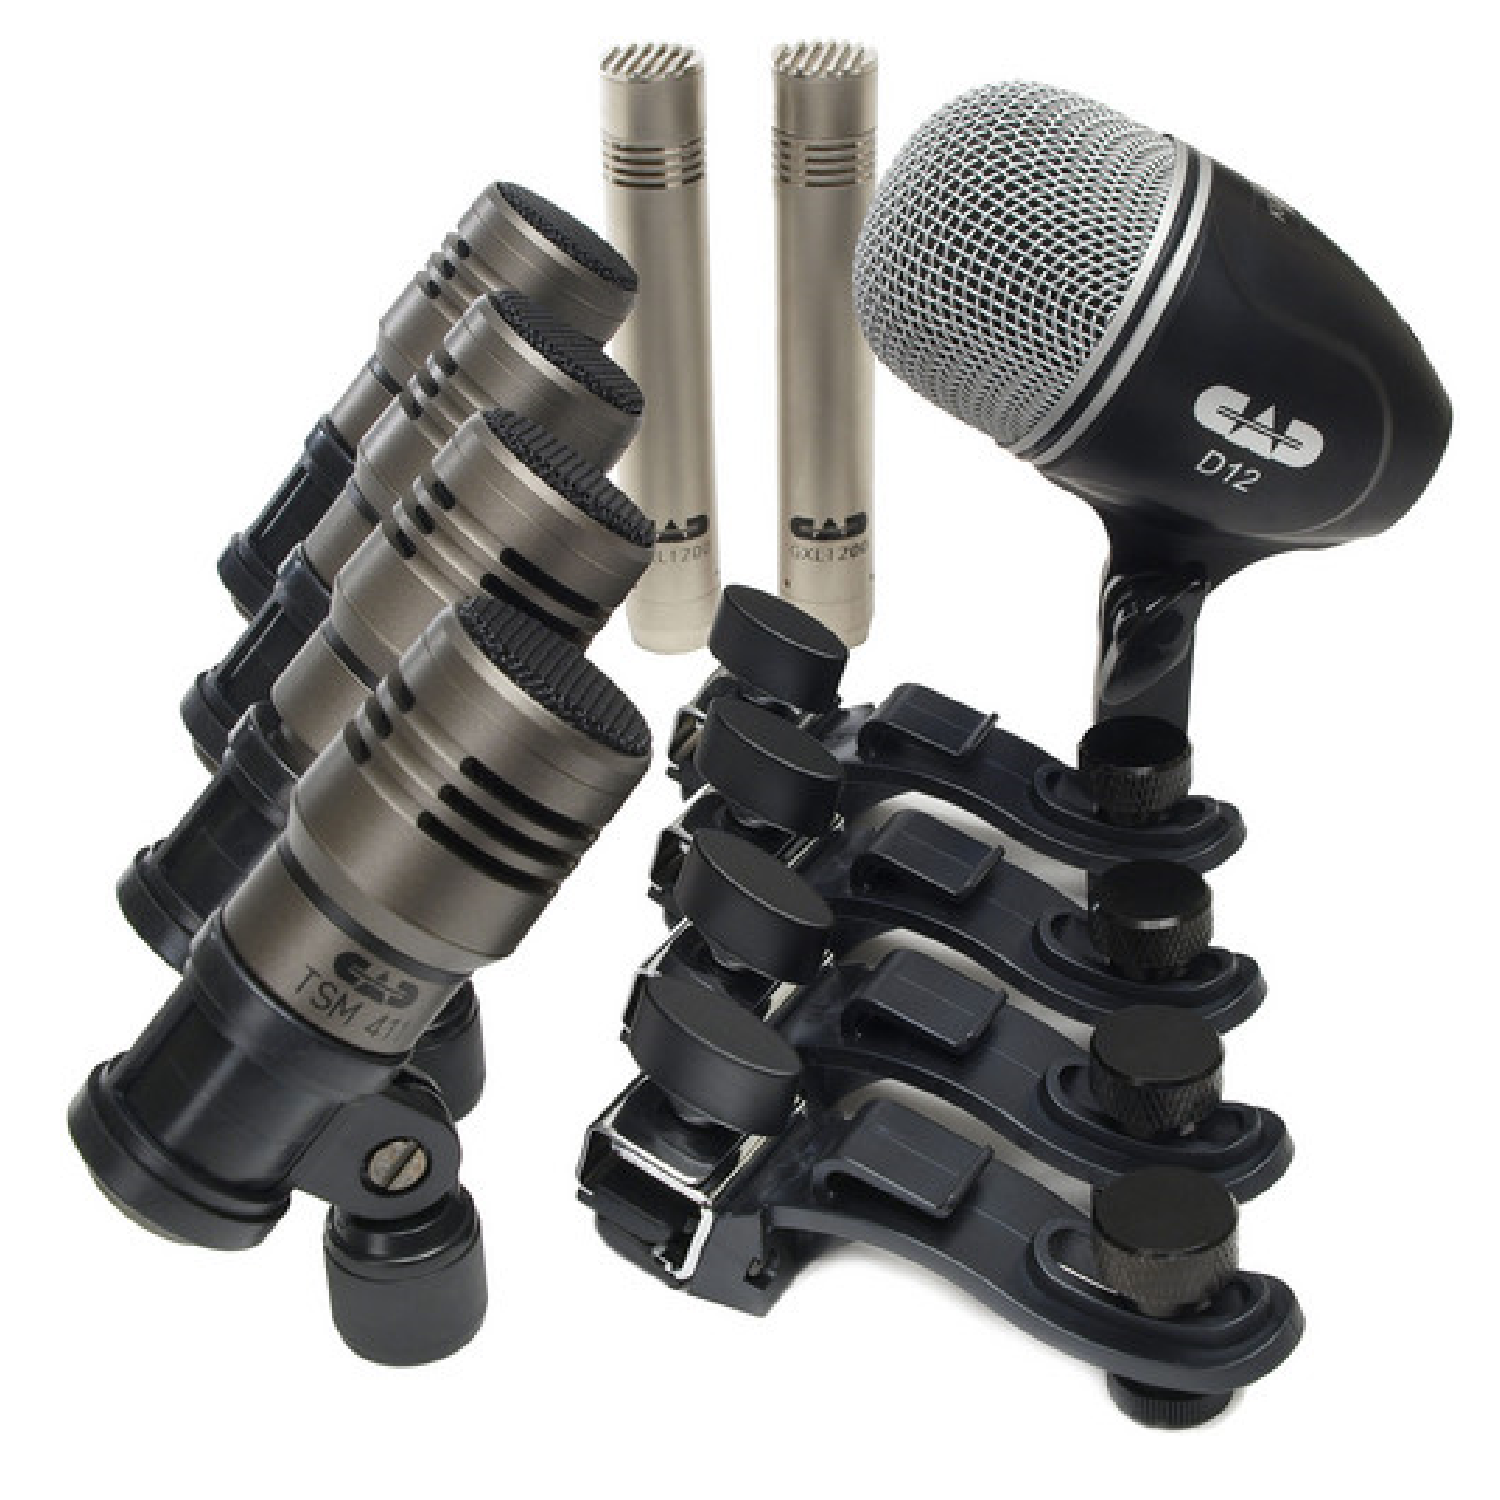 Premium Percussion Mic 1 x D12 Dynamic Large Kick Drum Mic, 4 x Tom Mic with Clips, 2 x Instrument Condenser HiHats, 4 x Drum Mic Clips   TOURING7 cad audio